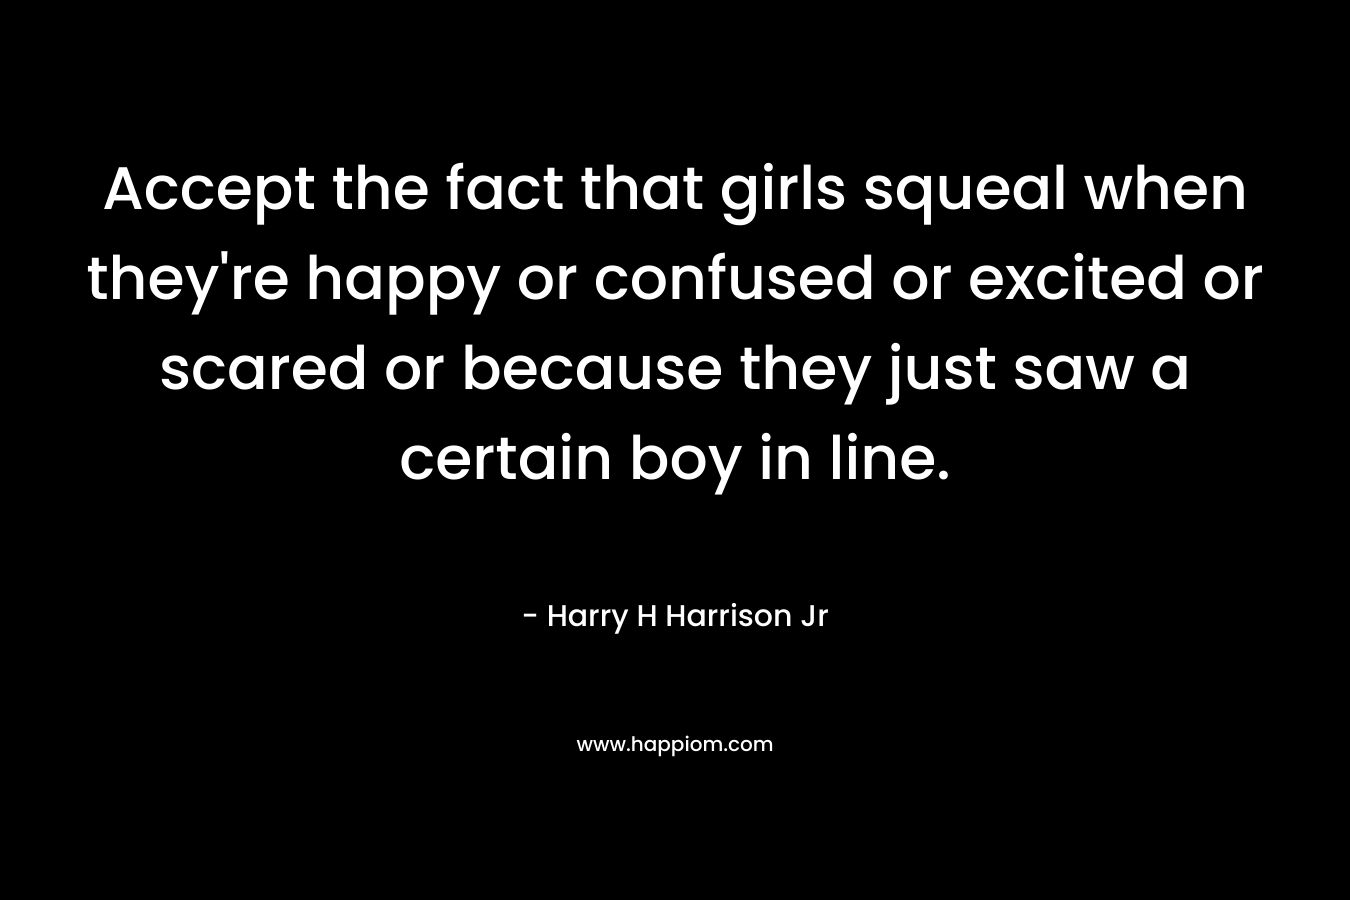 Accept the fact that girls squeal when they're happy or confused or excited or scared or because they just saw a certain boy in line.